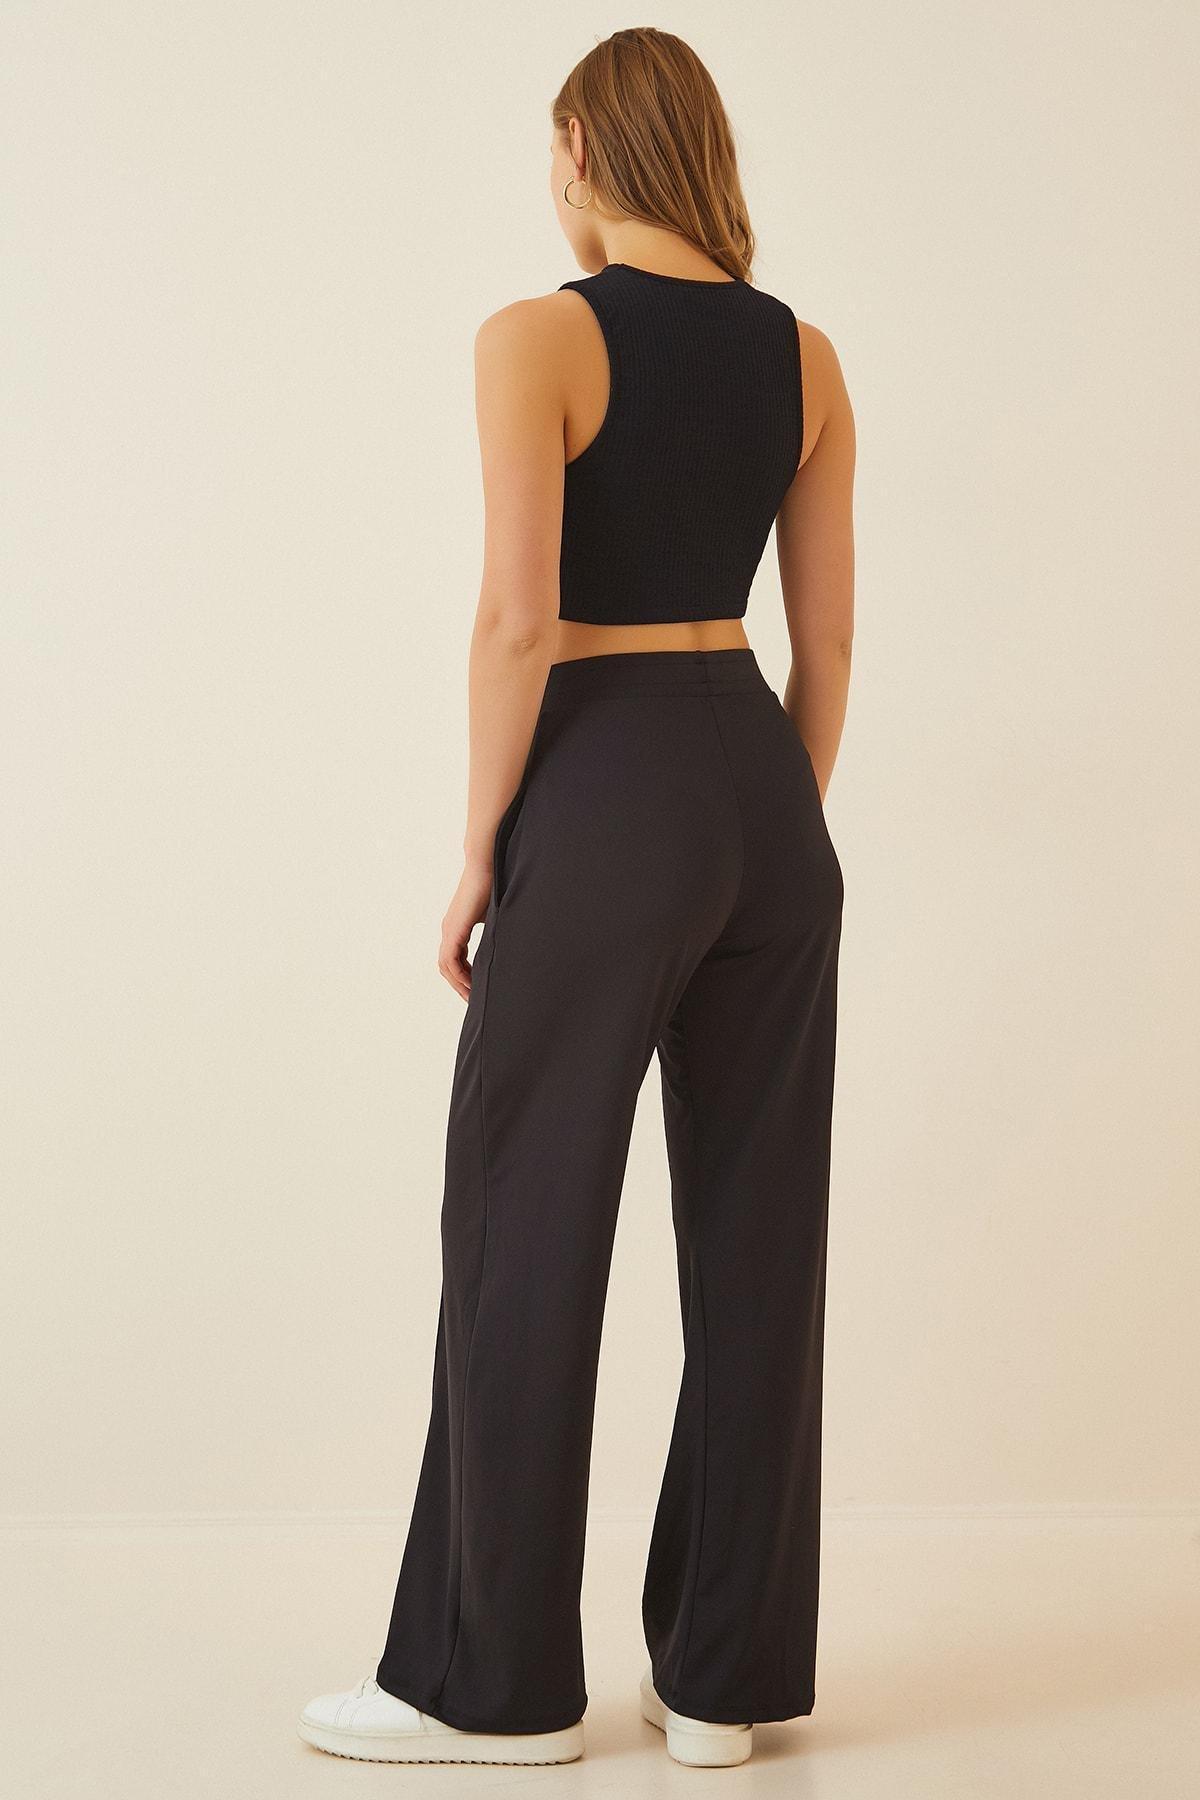 Happiness Istanbul - Black Relaxed Wide Leg Pants